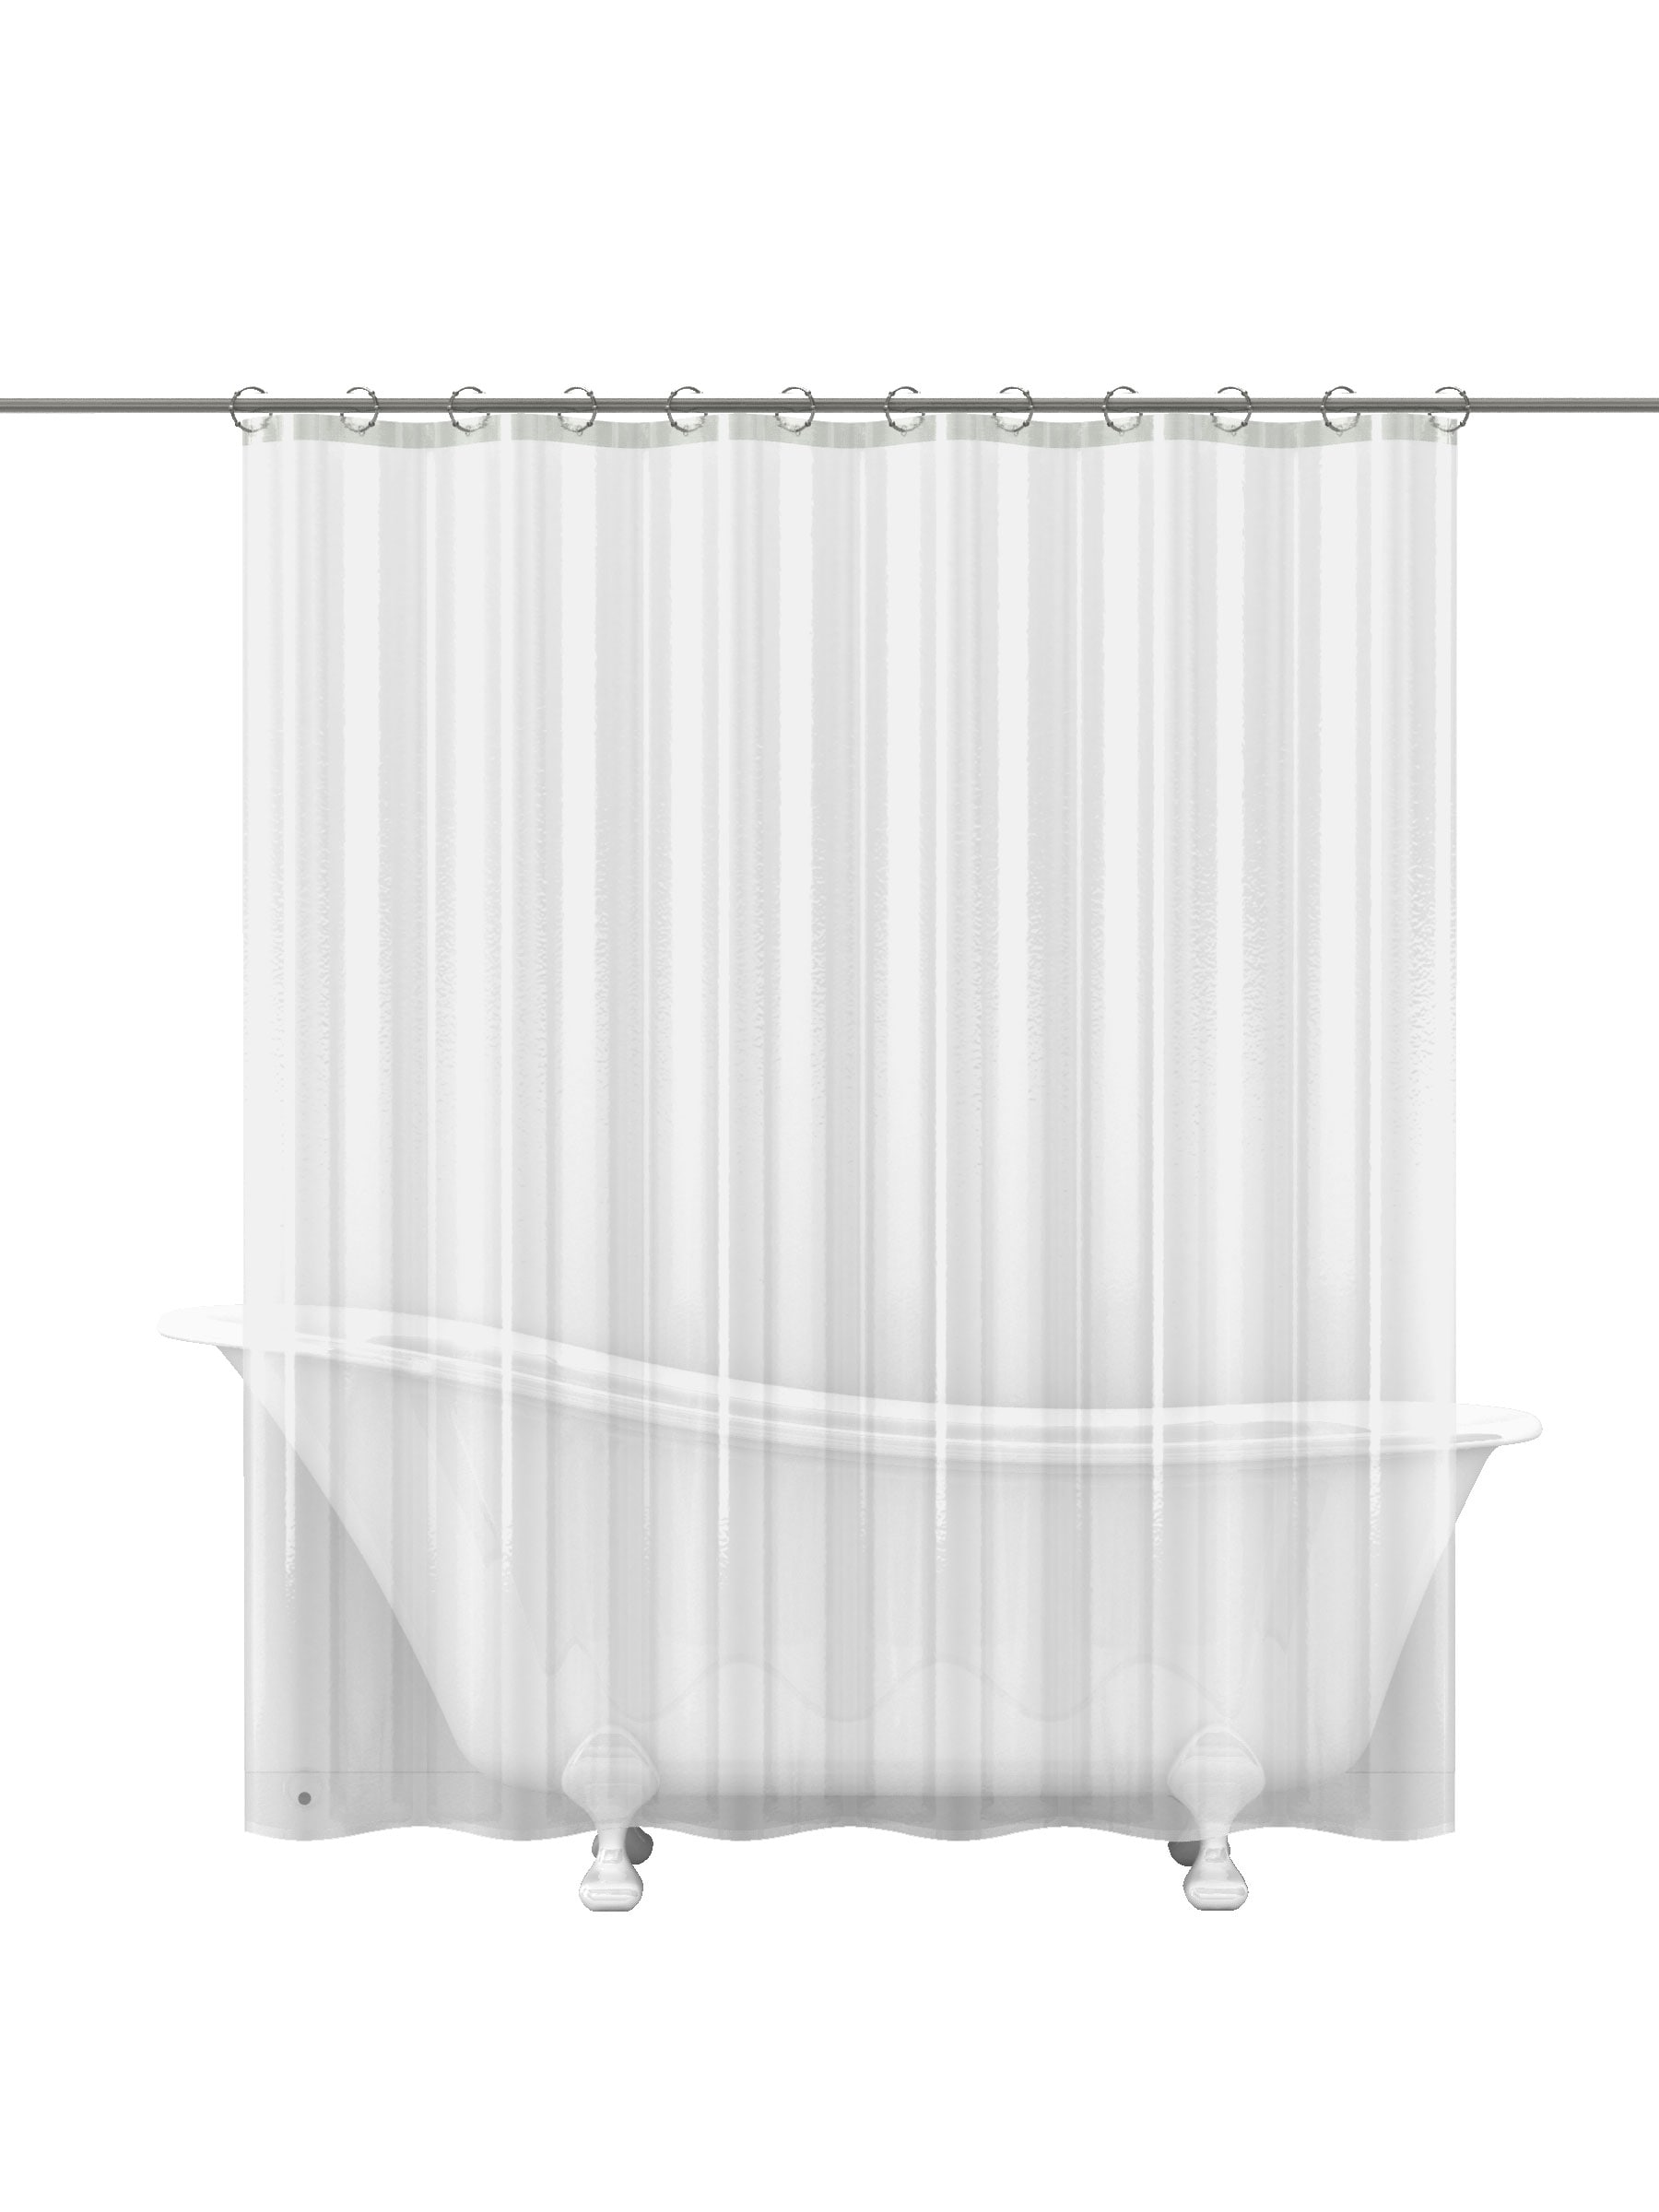 Shower Curtains Liners At Com, What Are Most Shower Curtains Made Of